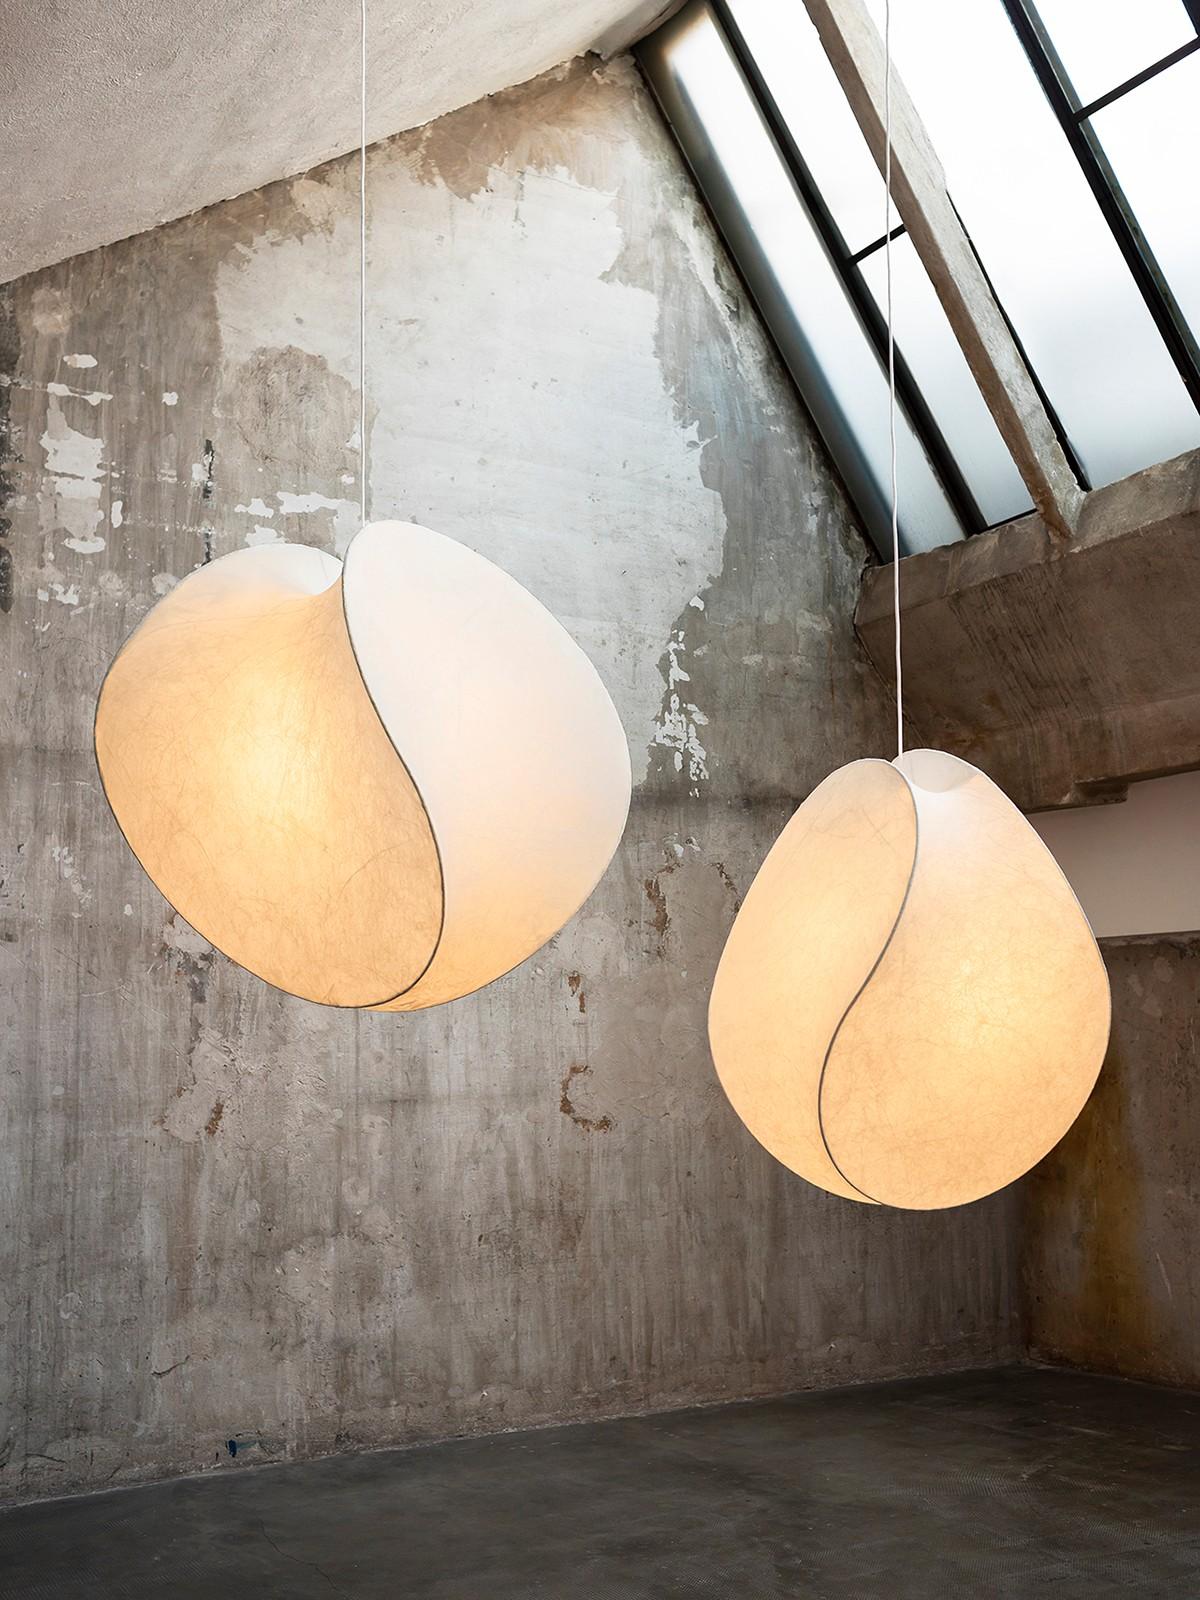 E27 dimmable bulb.
A dense, almost mysterious light is filtered through soft and enveloping materials. Luminosity and transparencies fluctuate, creating repetitions of lights and shadows, solids, and voids. Inspired by Object Art and in particular